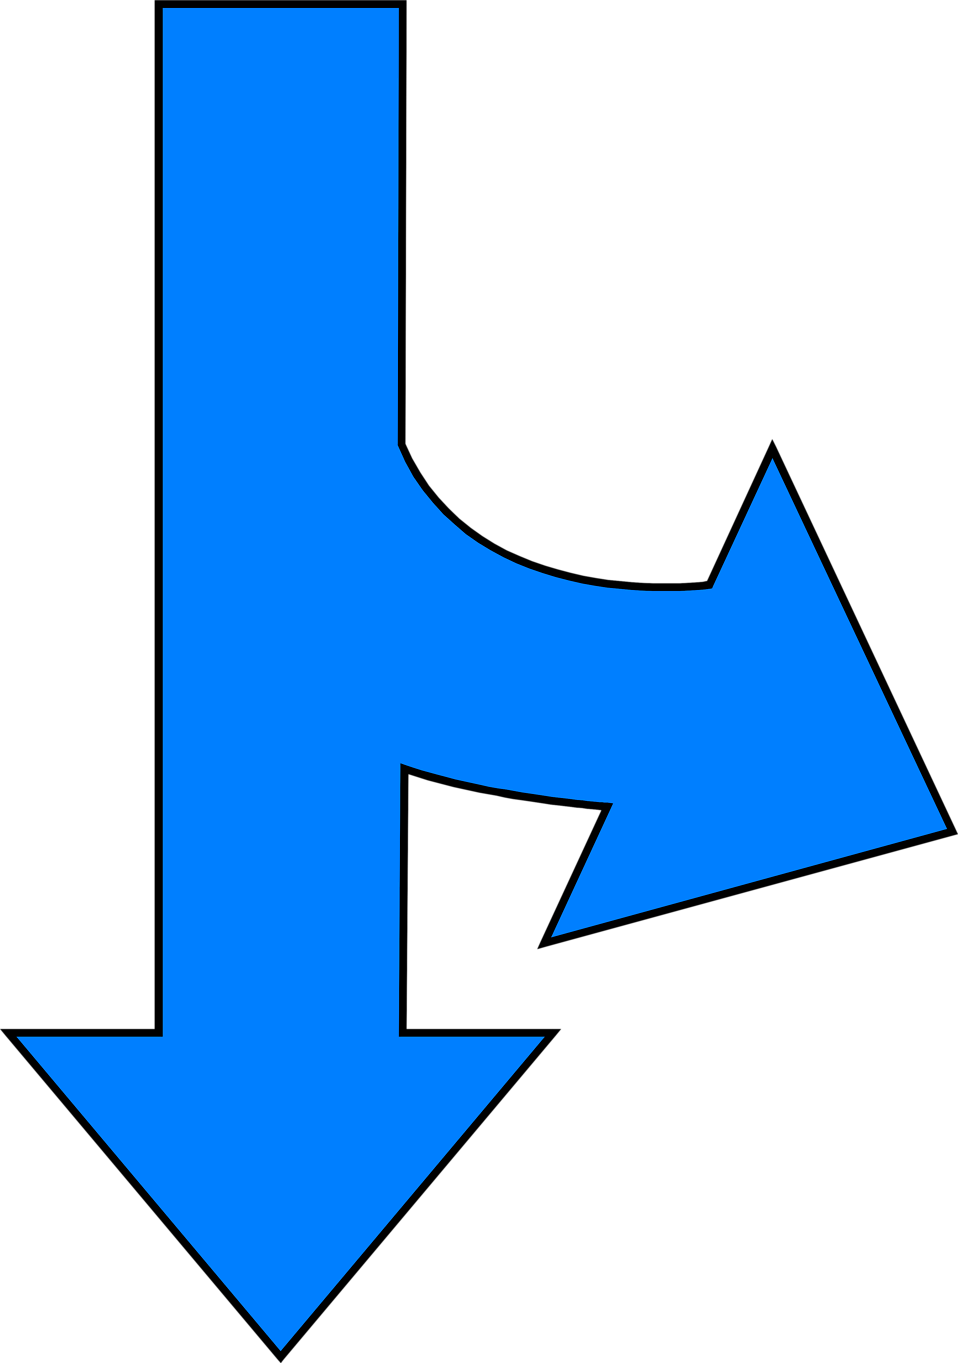 Arrows Blue - Arrow Right And Down (958x1363)